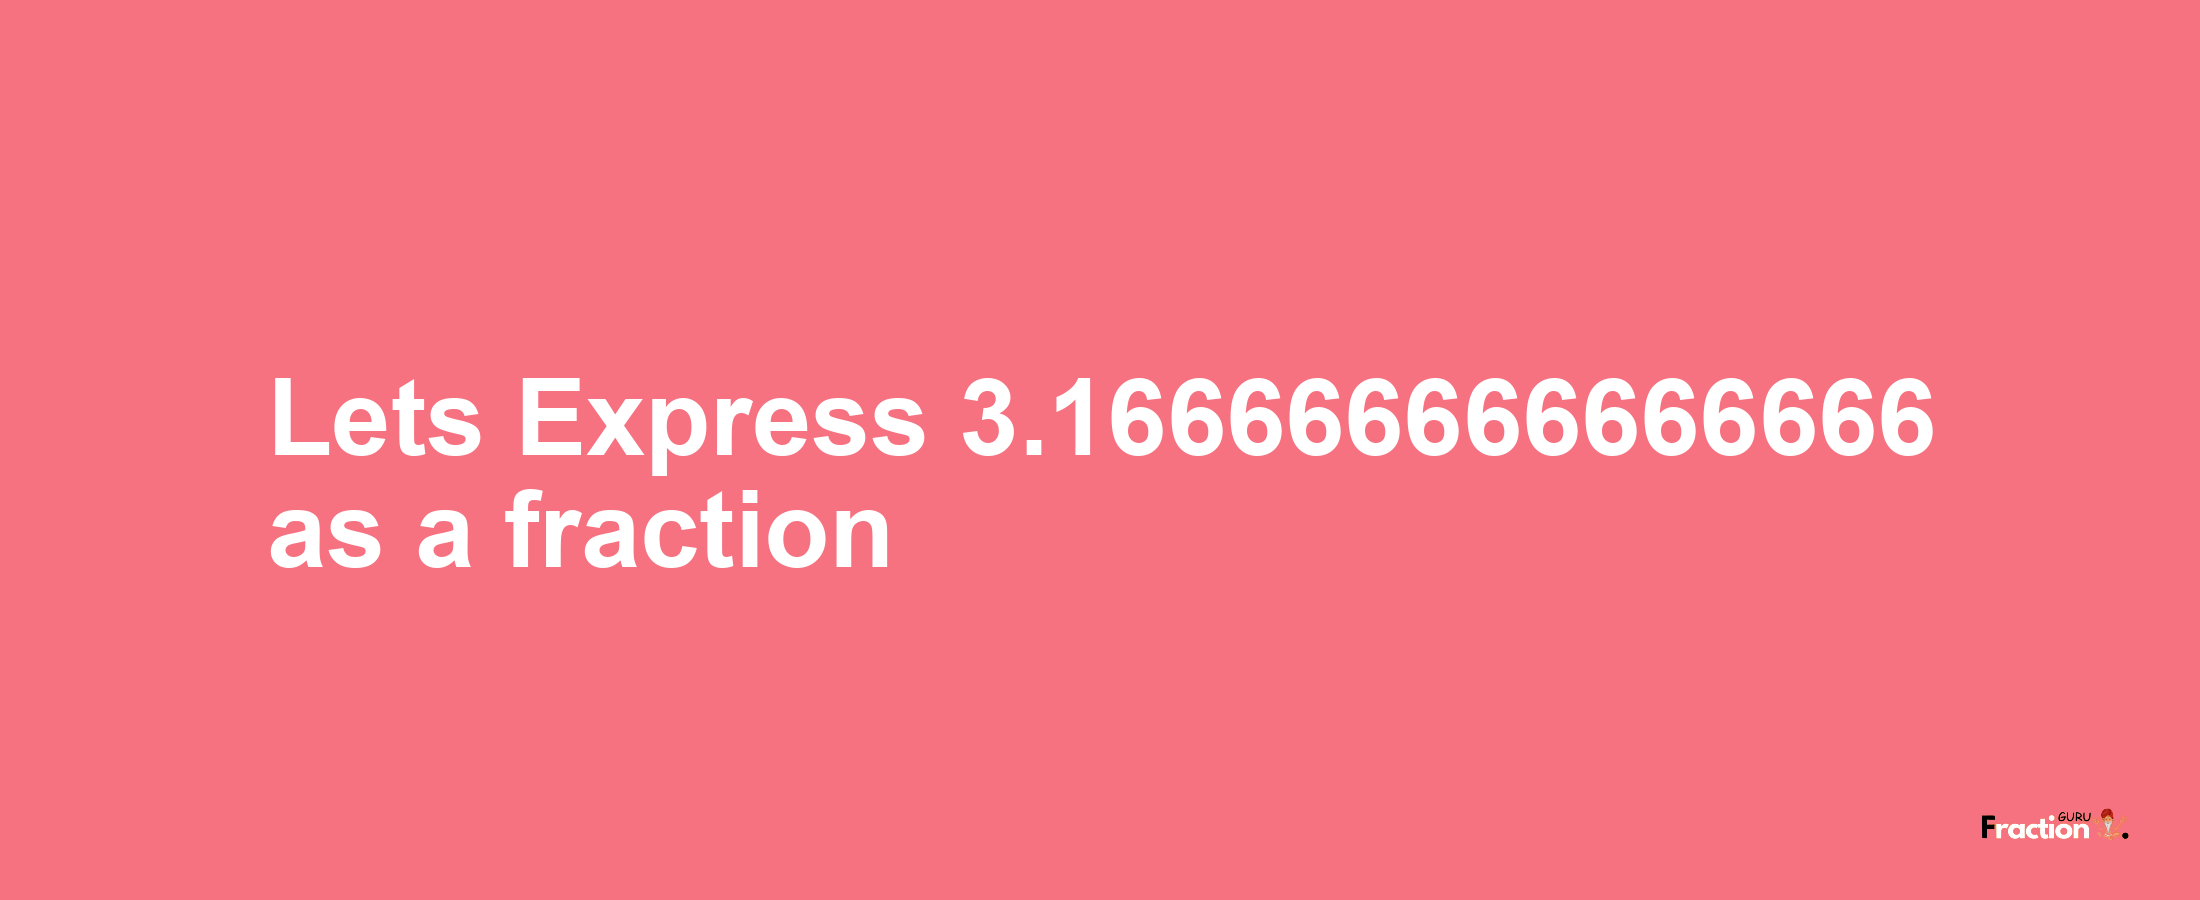 Lets Express 3.166666666666666 as afraction